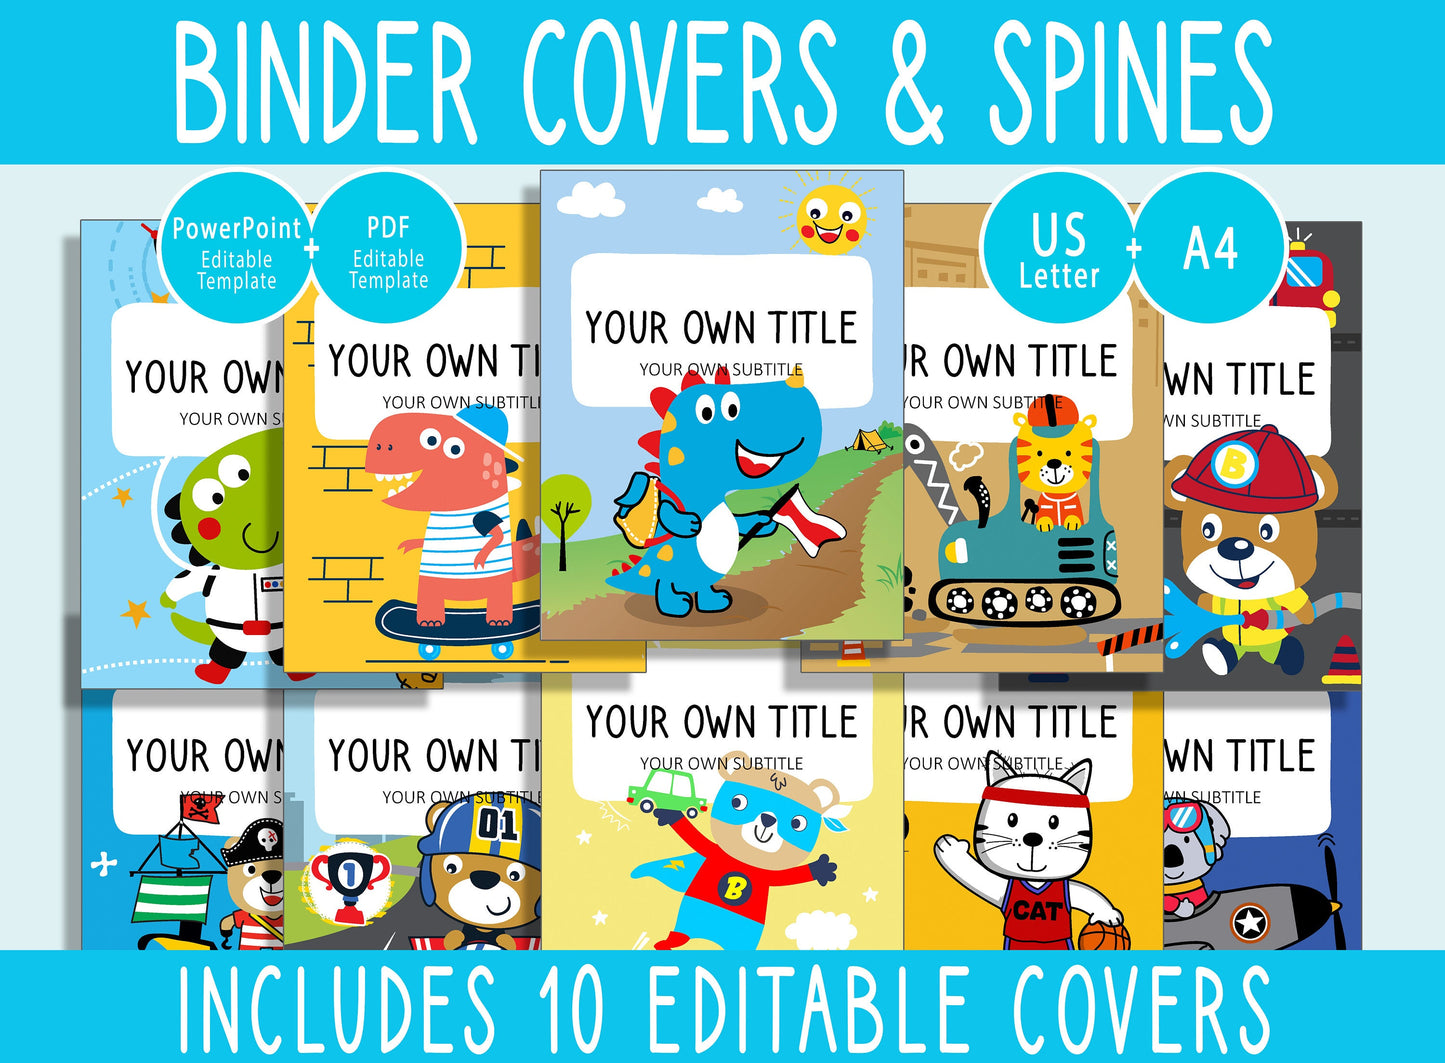 10 Editable Boys Binder Covers, Includes 1, 1.5, 2" Spines, Available in A4 &US Letter, Editing with PowerPoint or PDF Reader